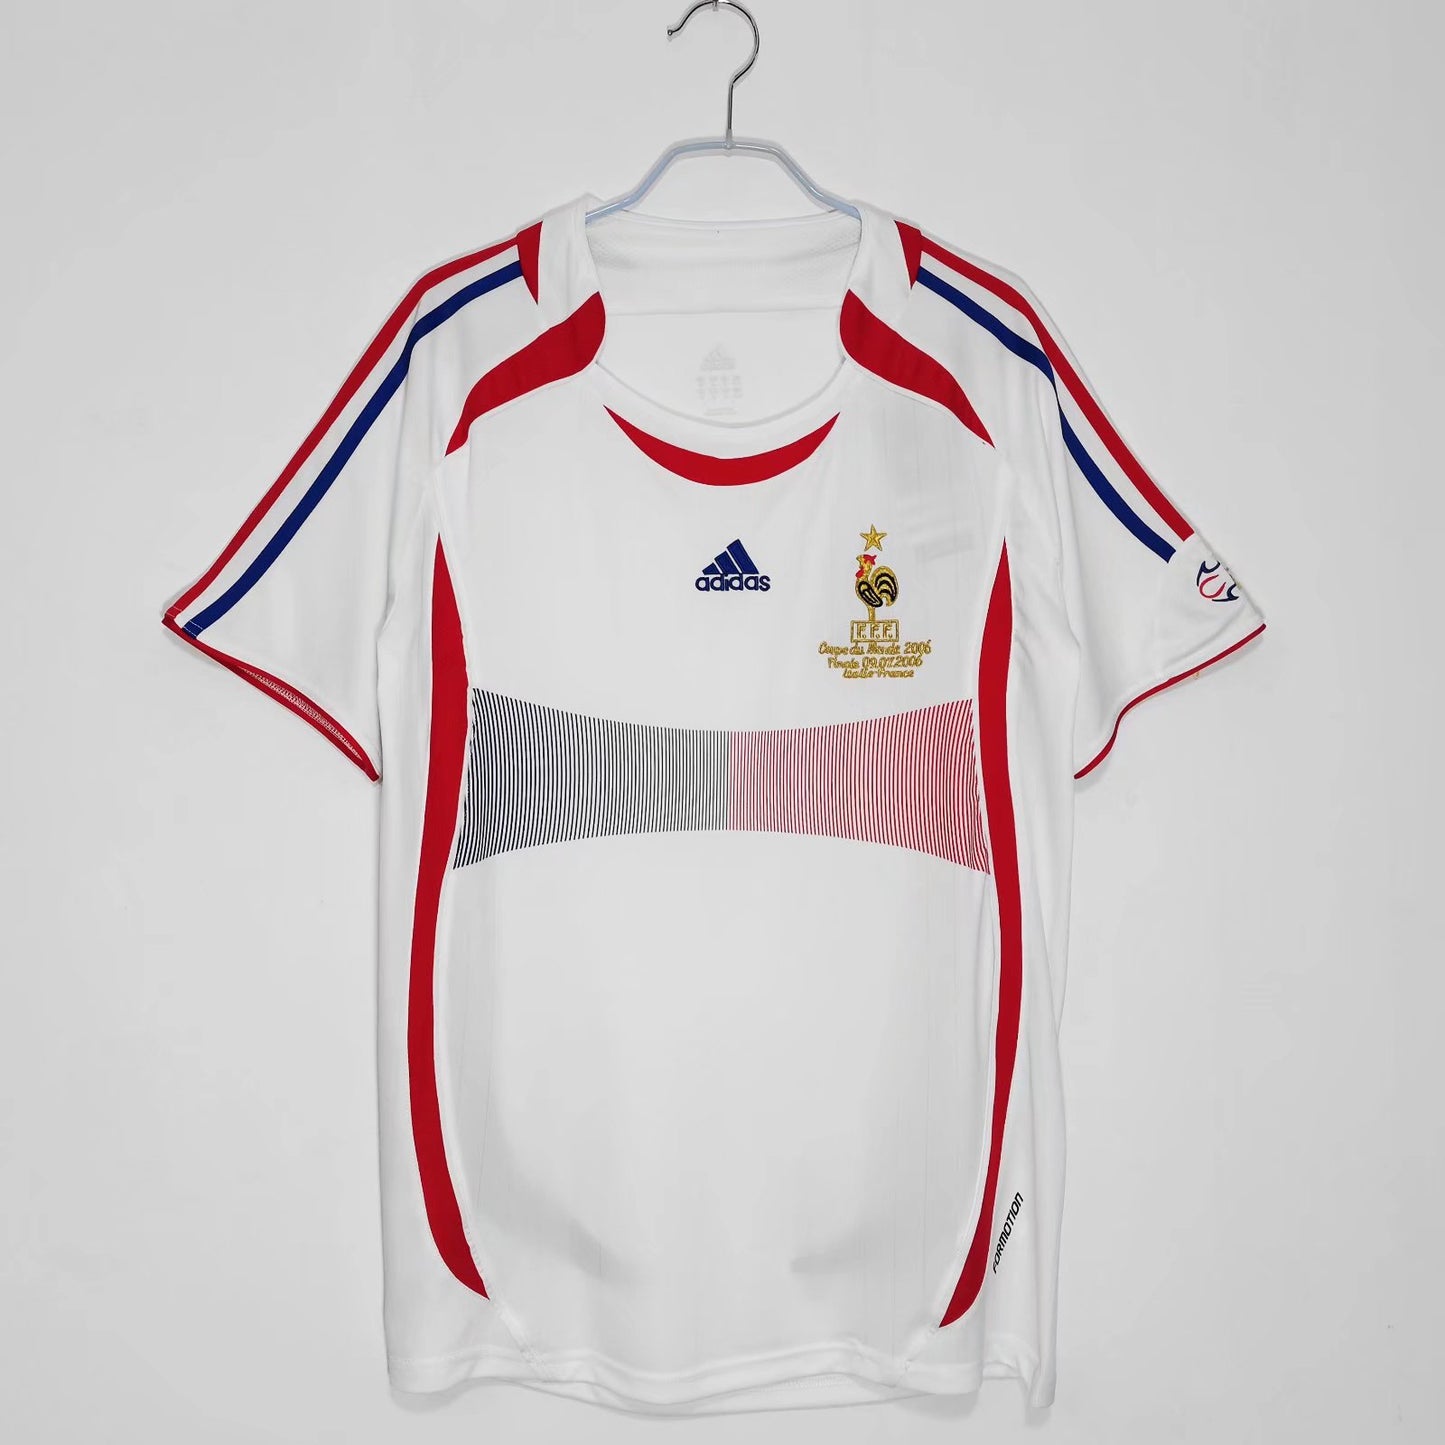 Vintage French team jersey 2006